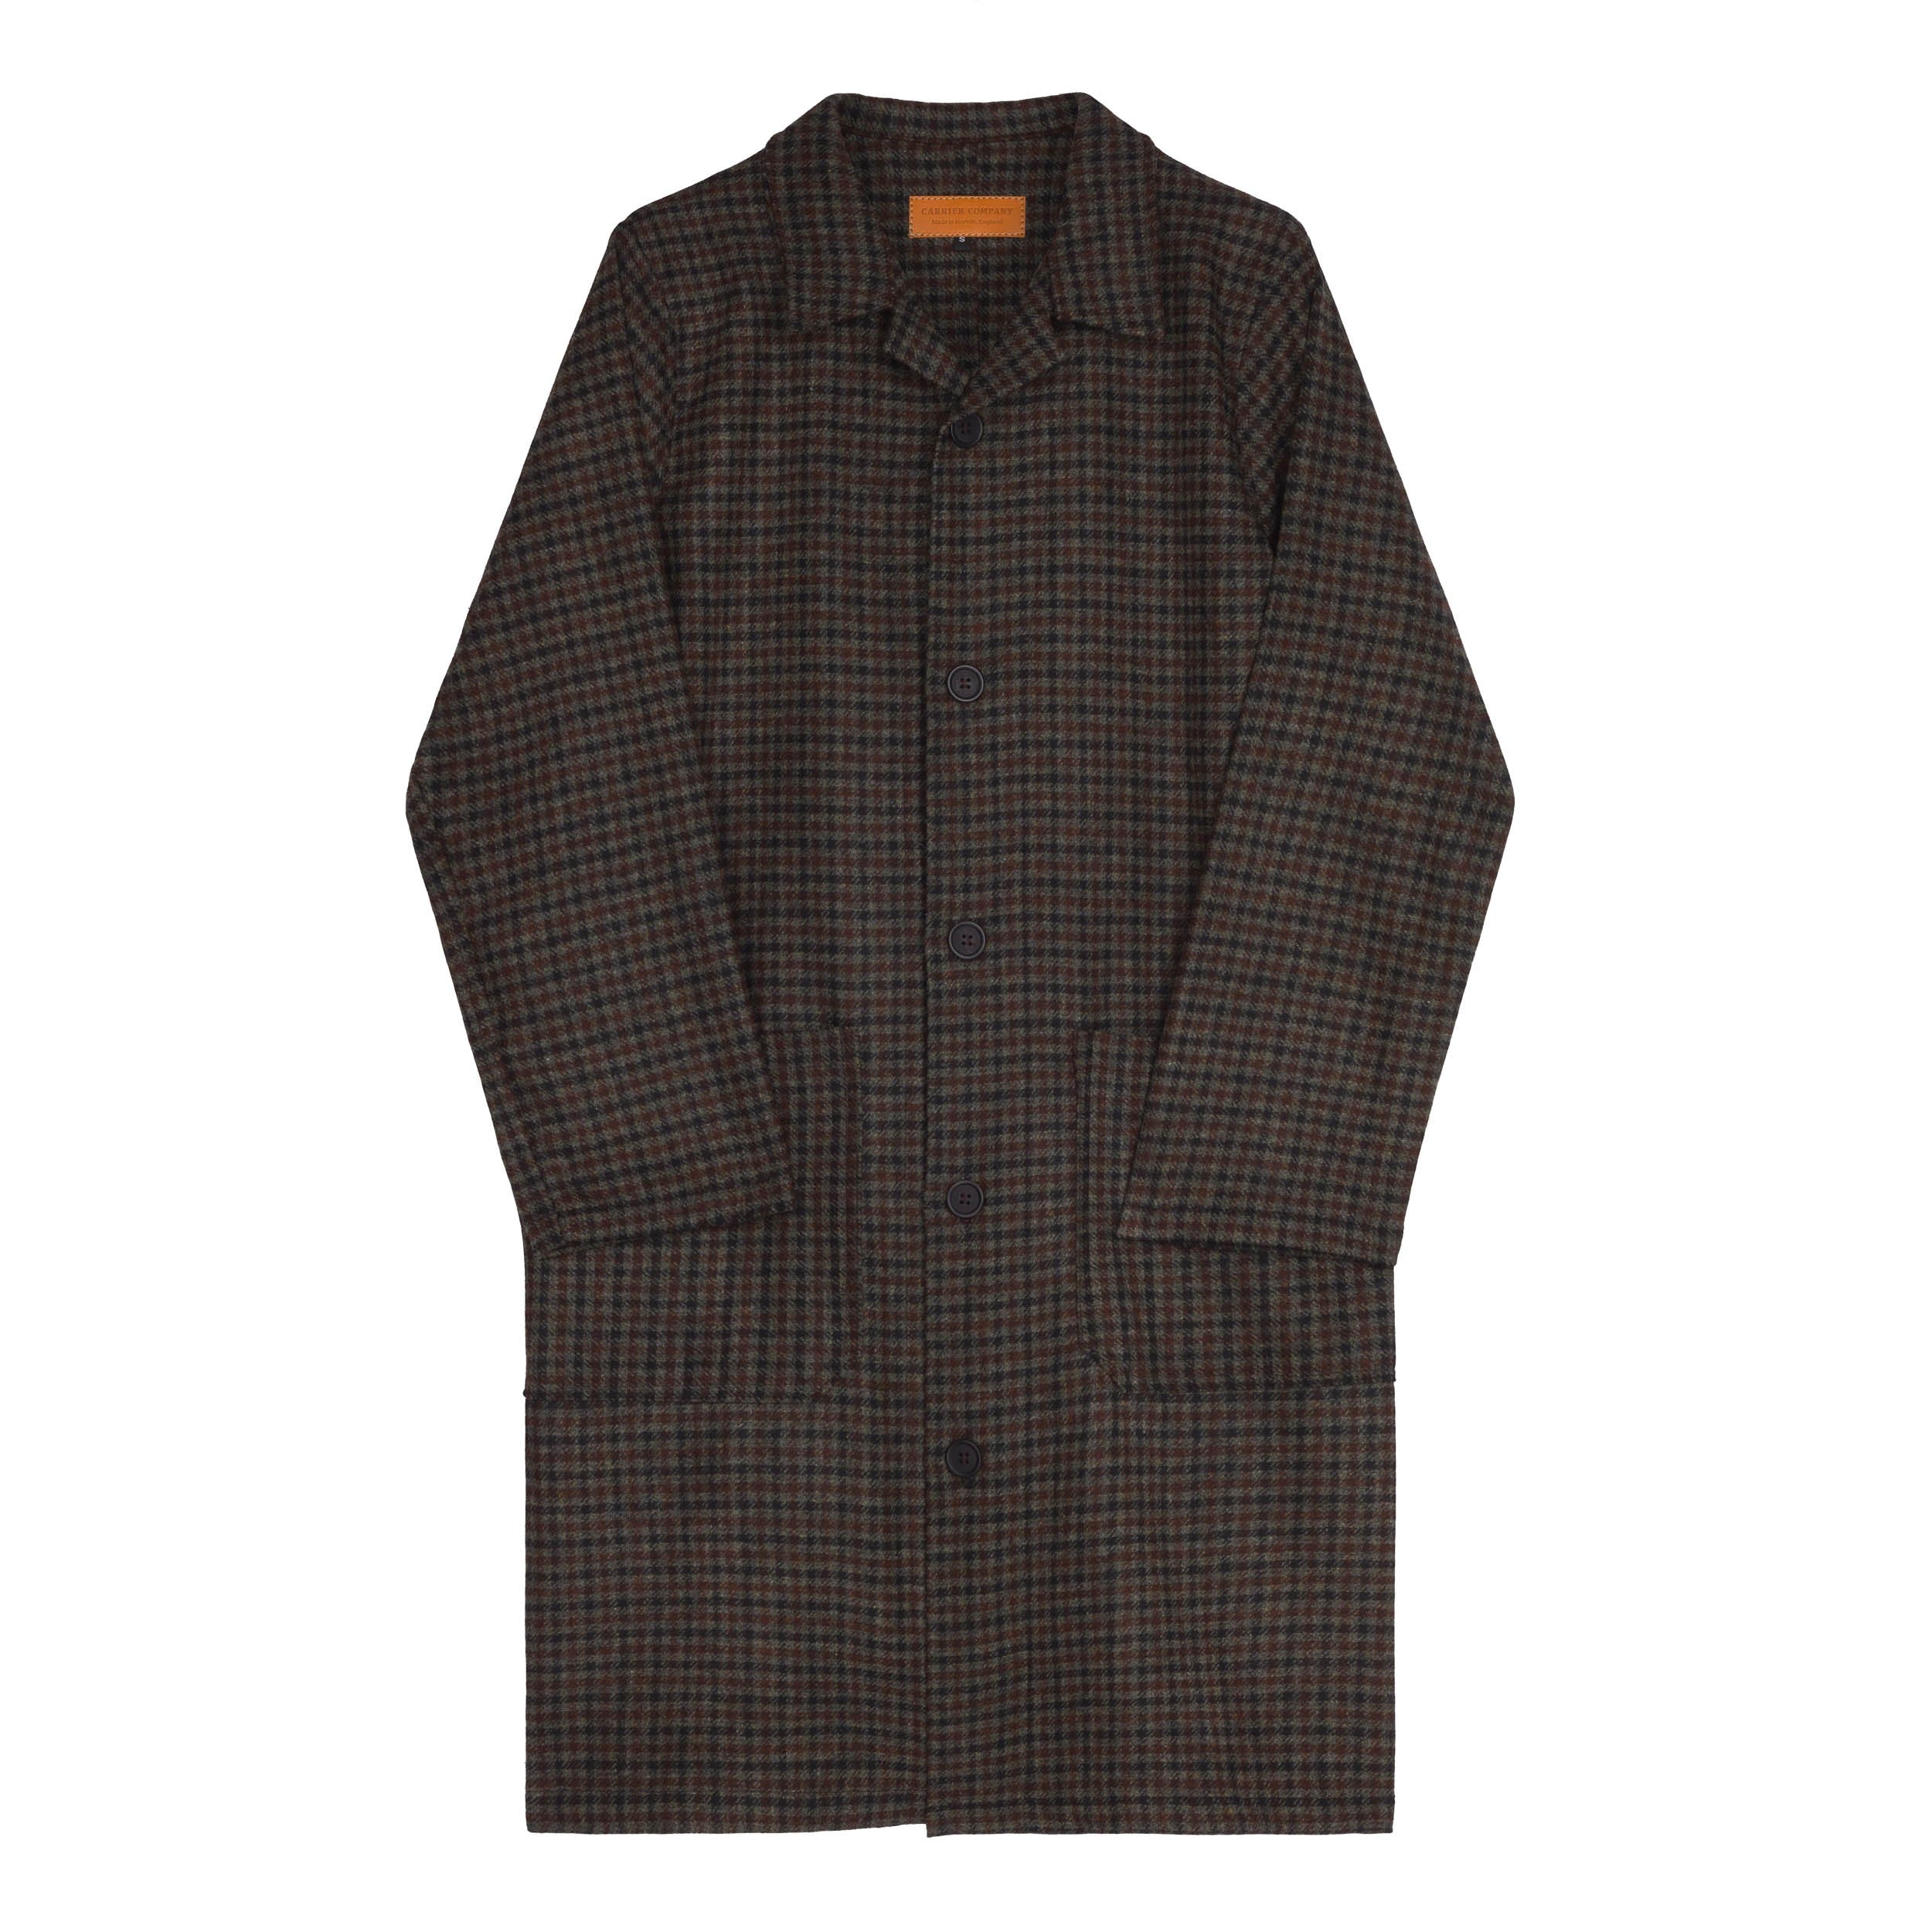 Carrier Company Wool Coat in Houndstooth